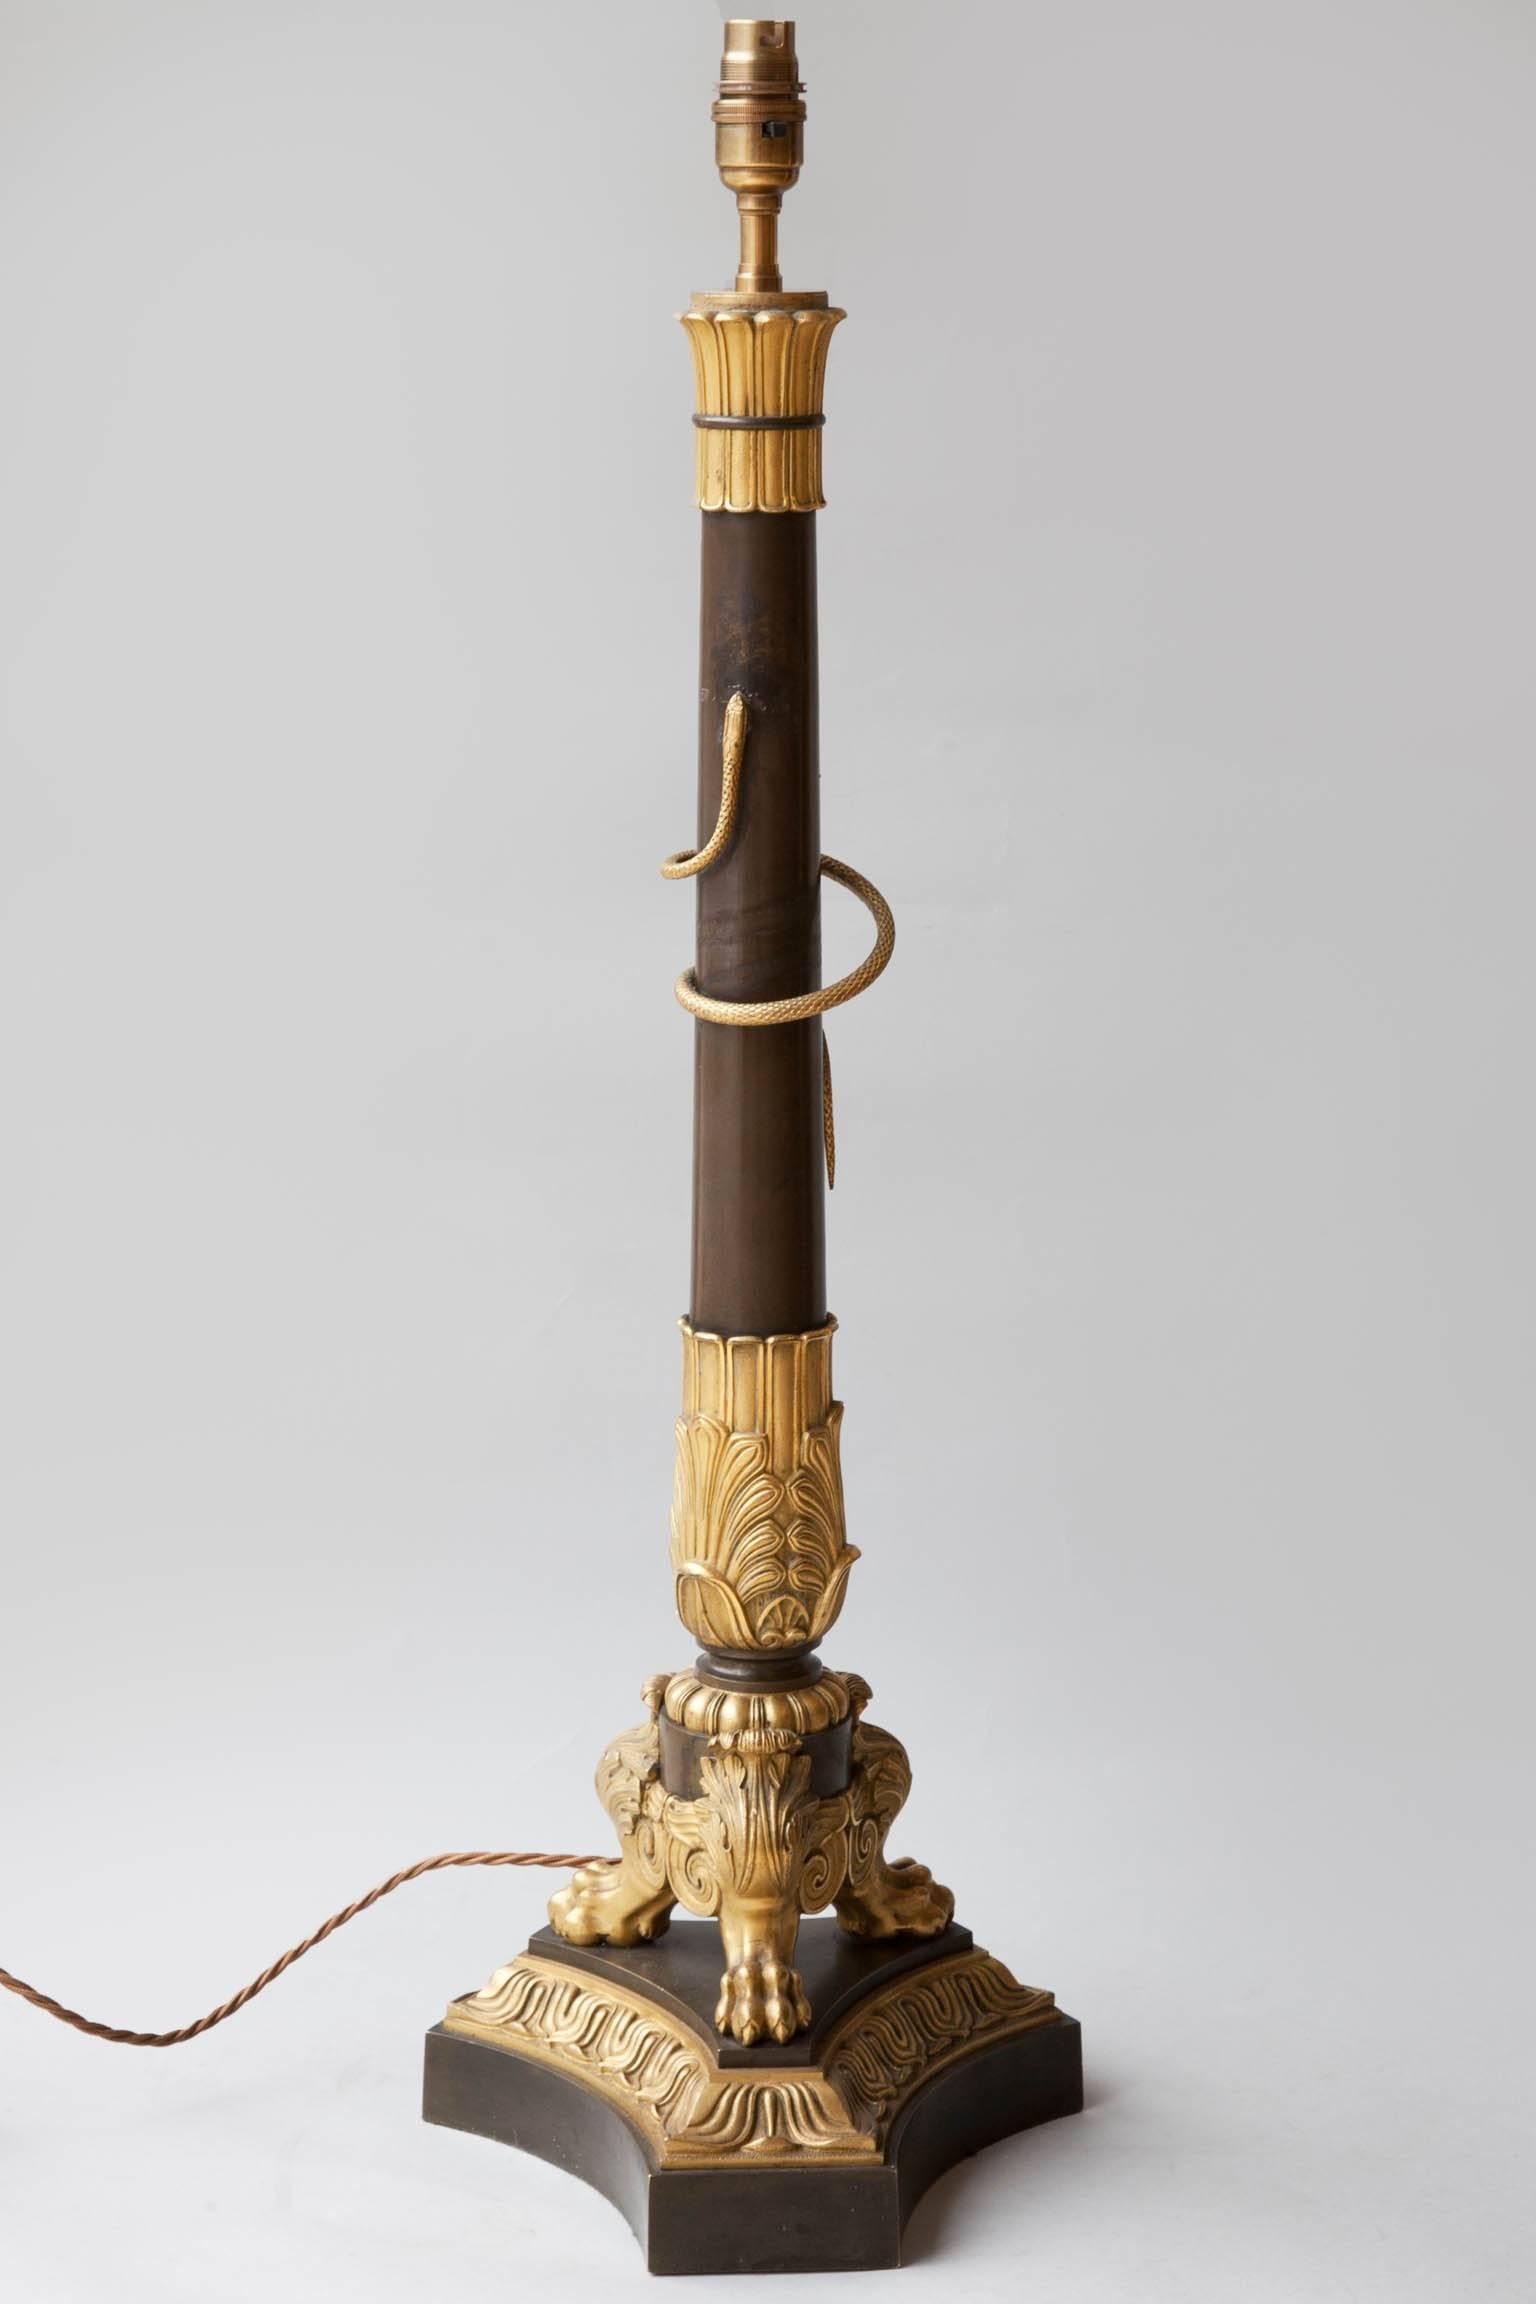 Early 19th century candlestick converted to a table lamp. Cast gilt leaves surround the top and bottom of the patinated column, supported on three gilt bronze paw feet mounted on a concave tripod base. A gilt bronze snake is attached to the central